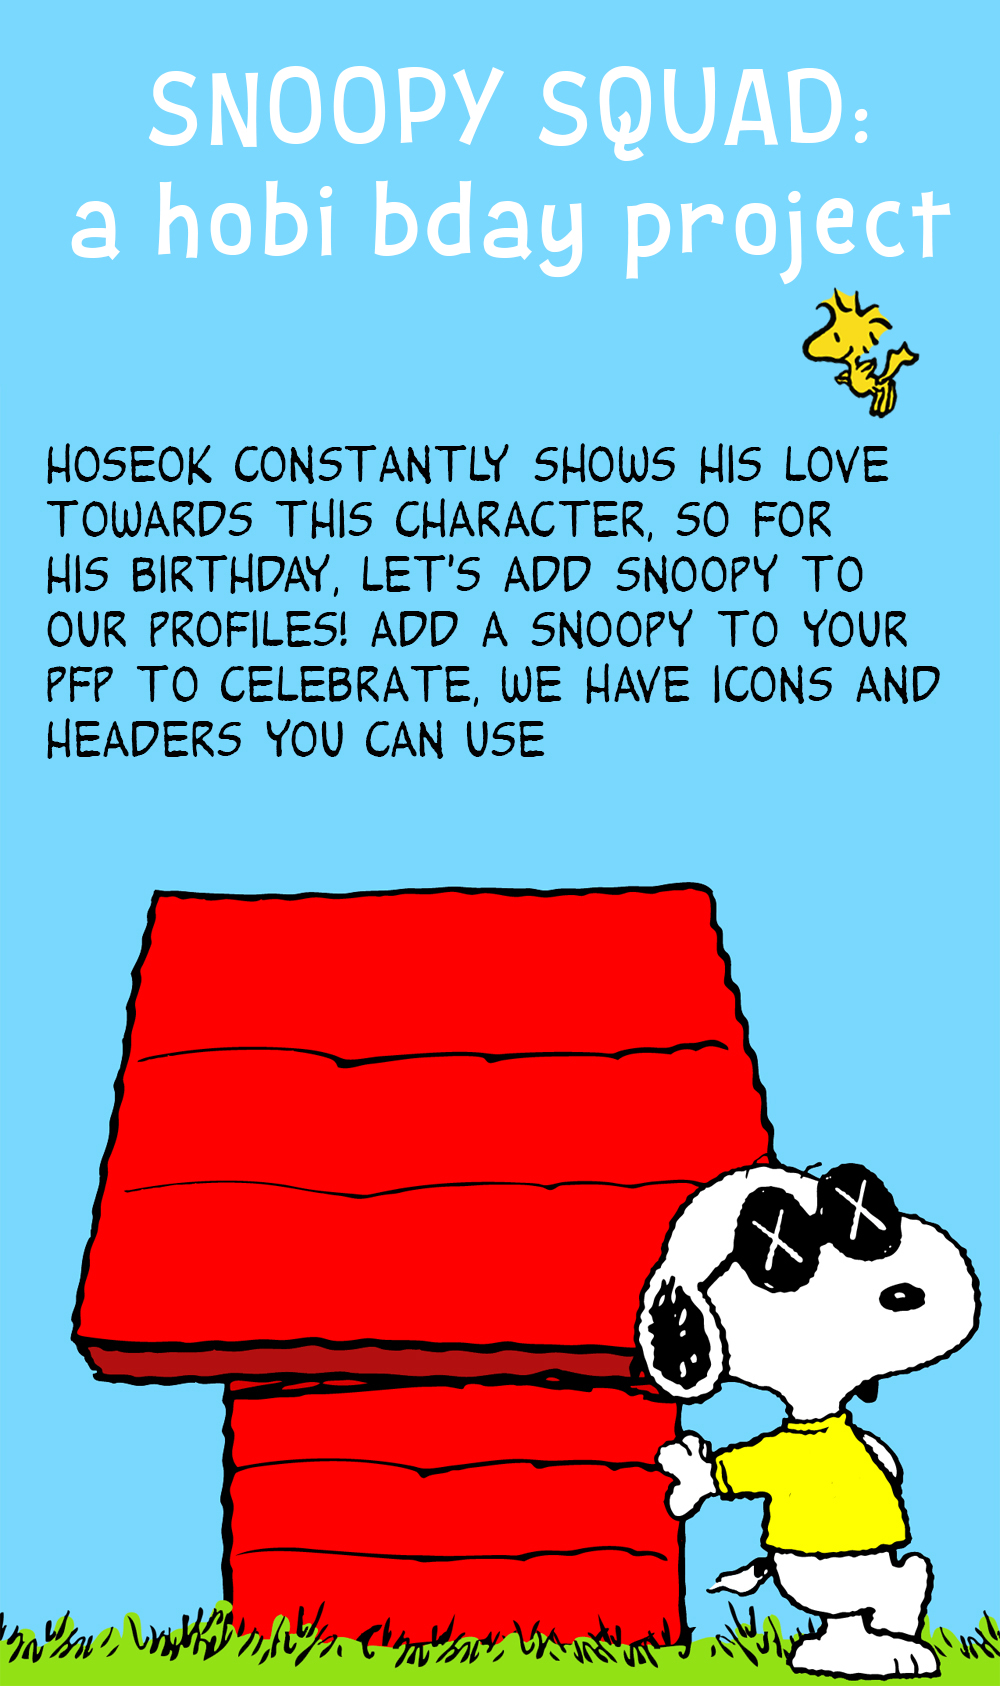 Ands Snoopy Squad A Hobi ay Project If You Could Share So It Gets To More People It Will Be Higly Appreciated